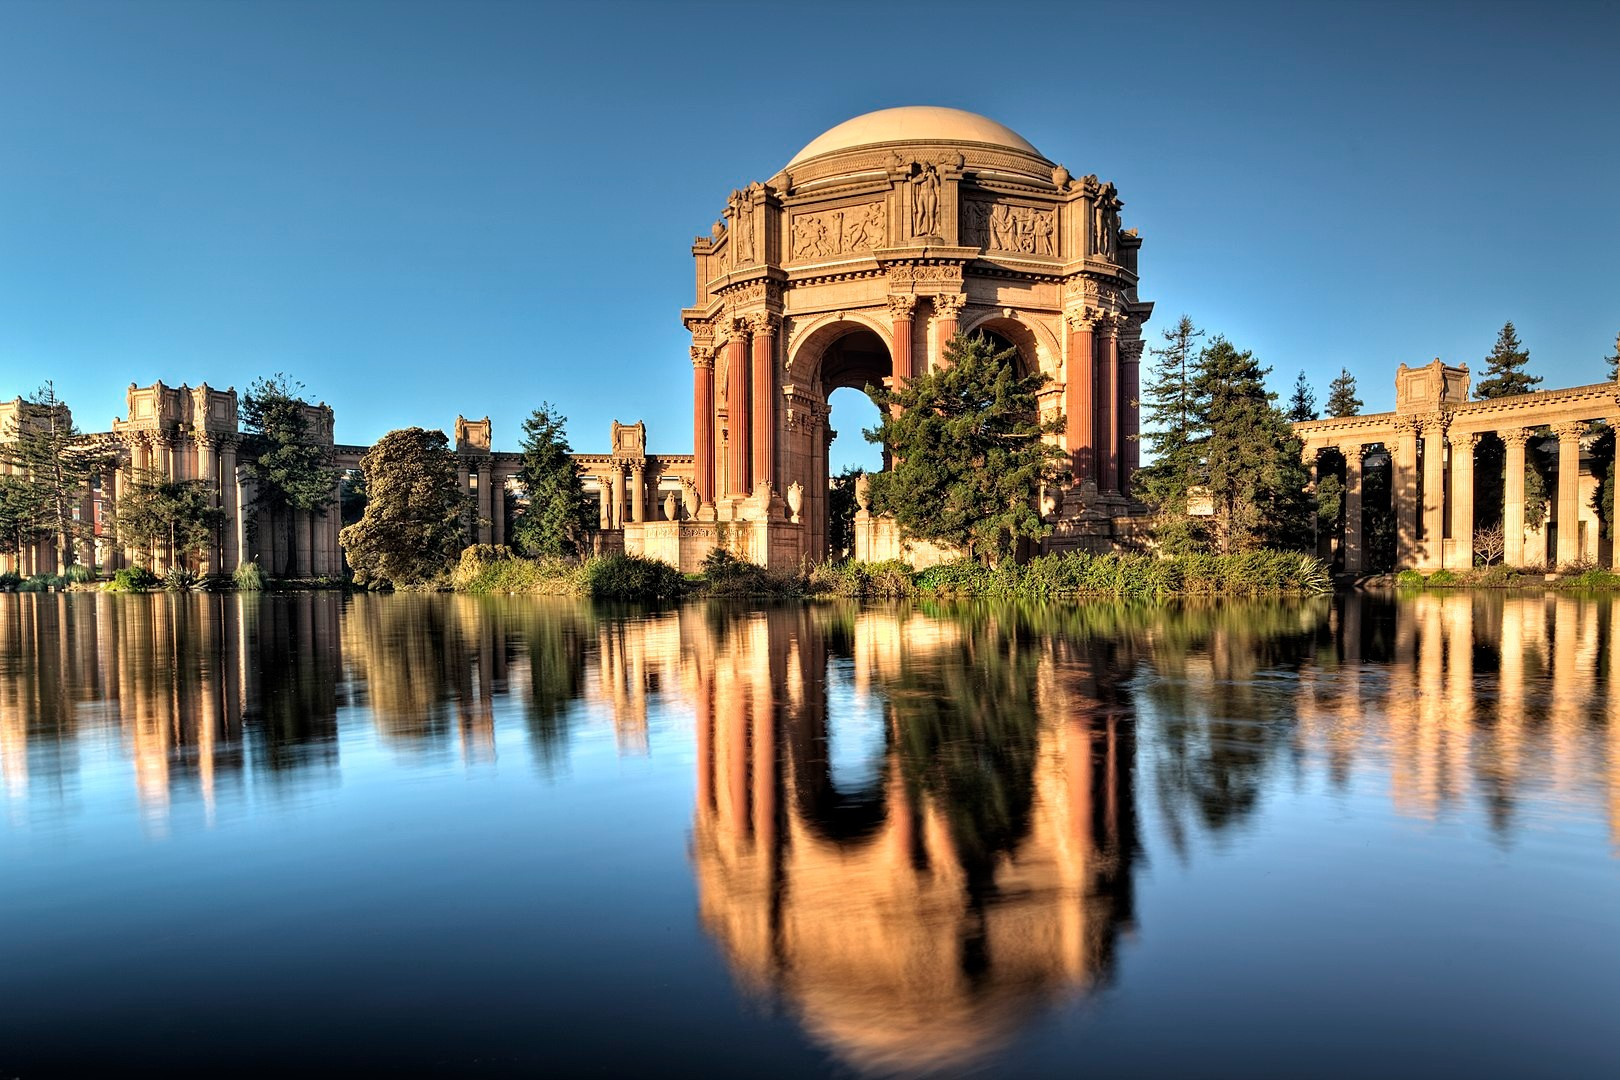 Автор: Kevin Cole (en:User:Kevinlcole) - originally posted to Flickr as Palace of Fine Arts, CC BY 2.0, https://commons.wikimedia.org/w/index.php?curid=10028310